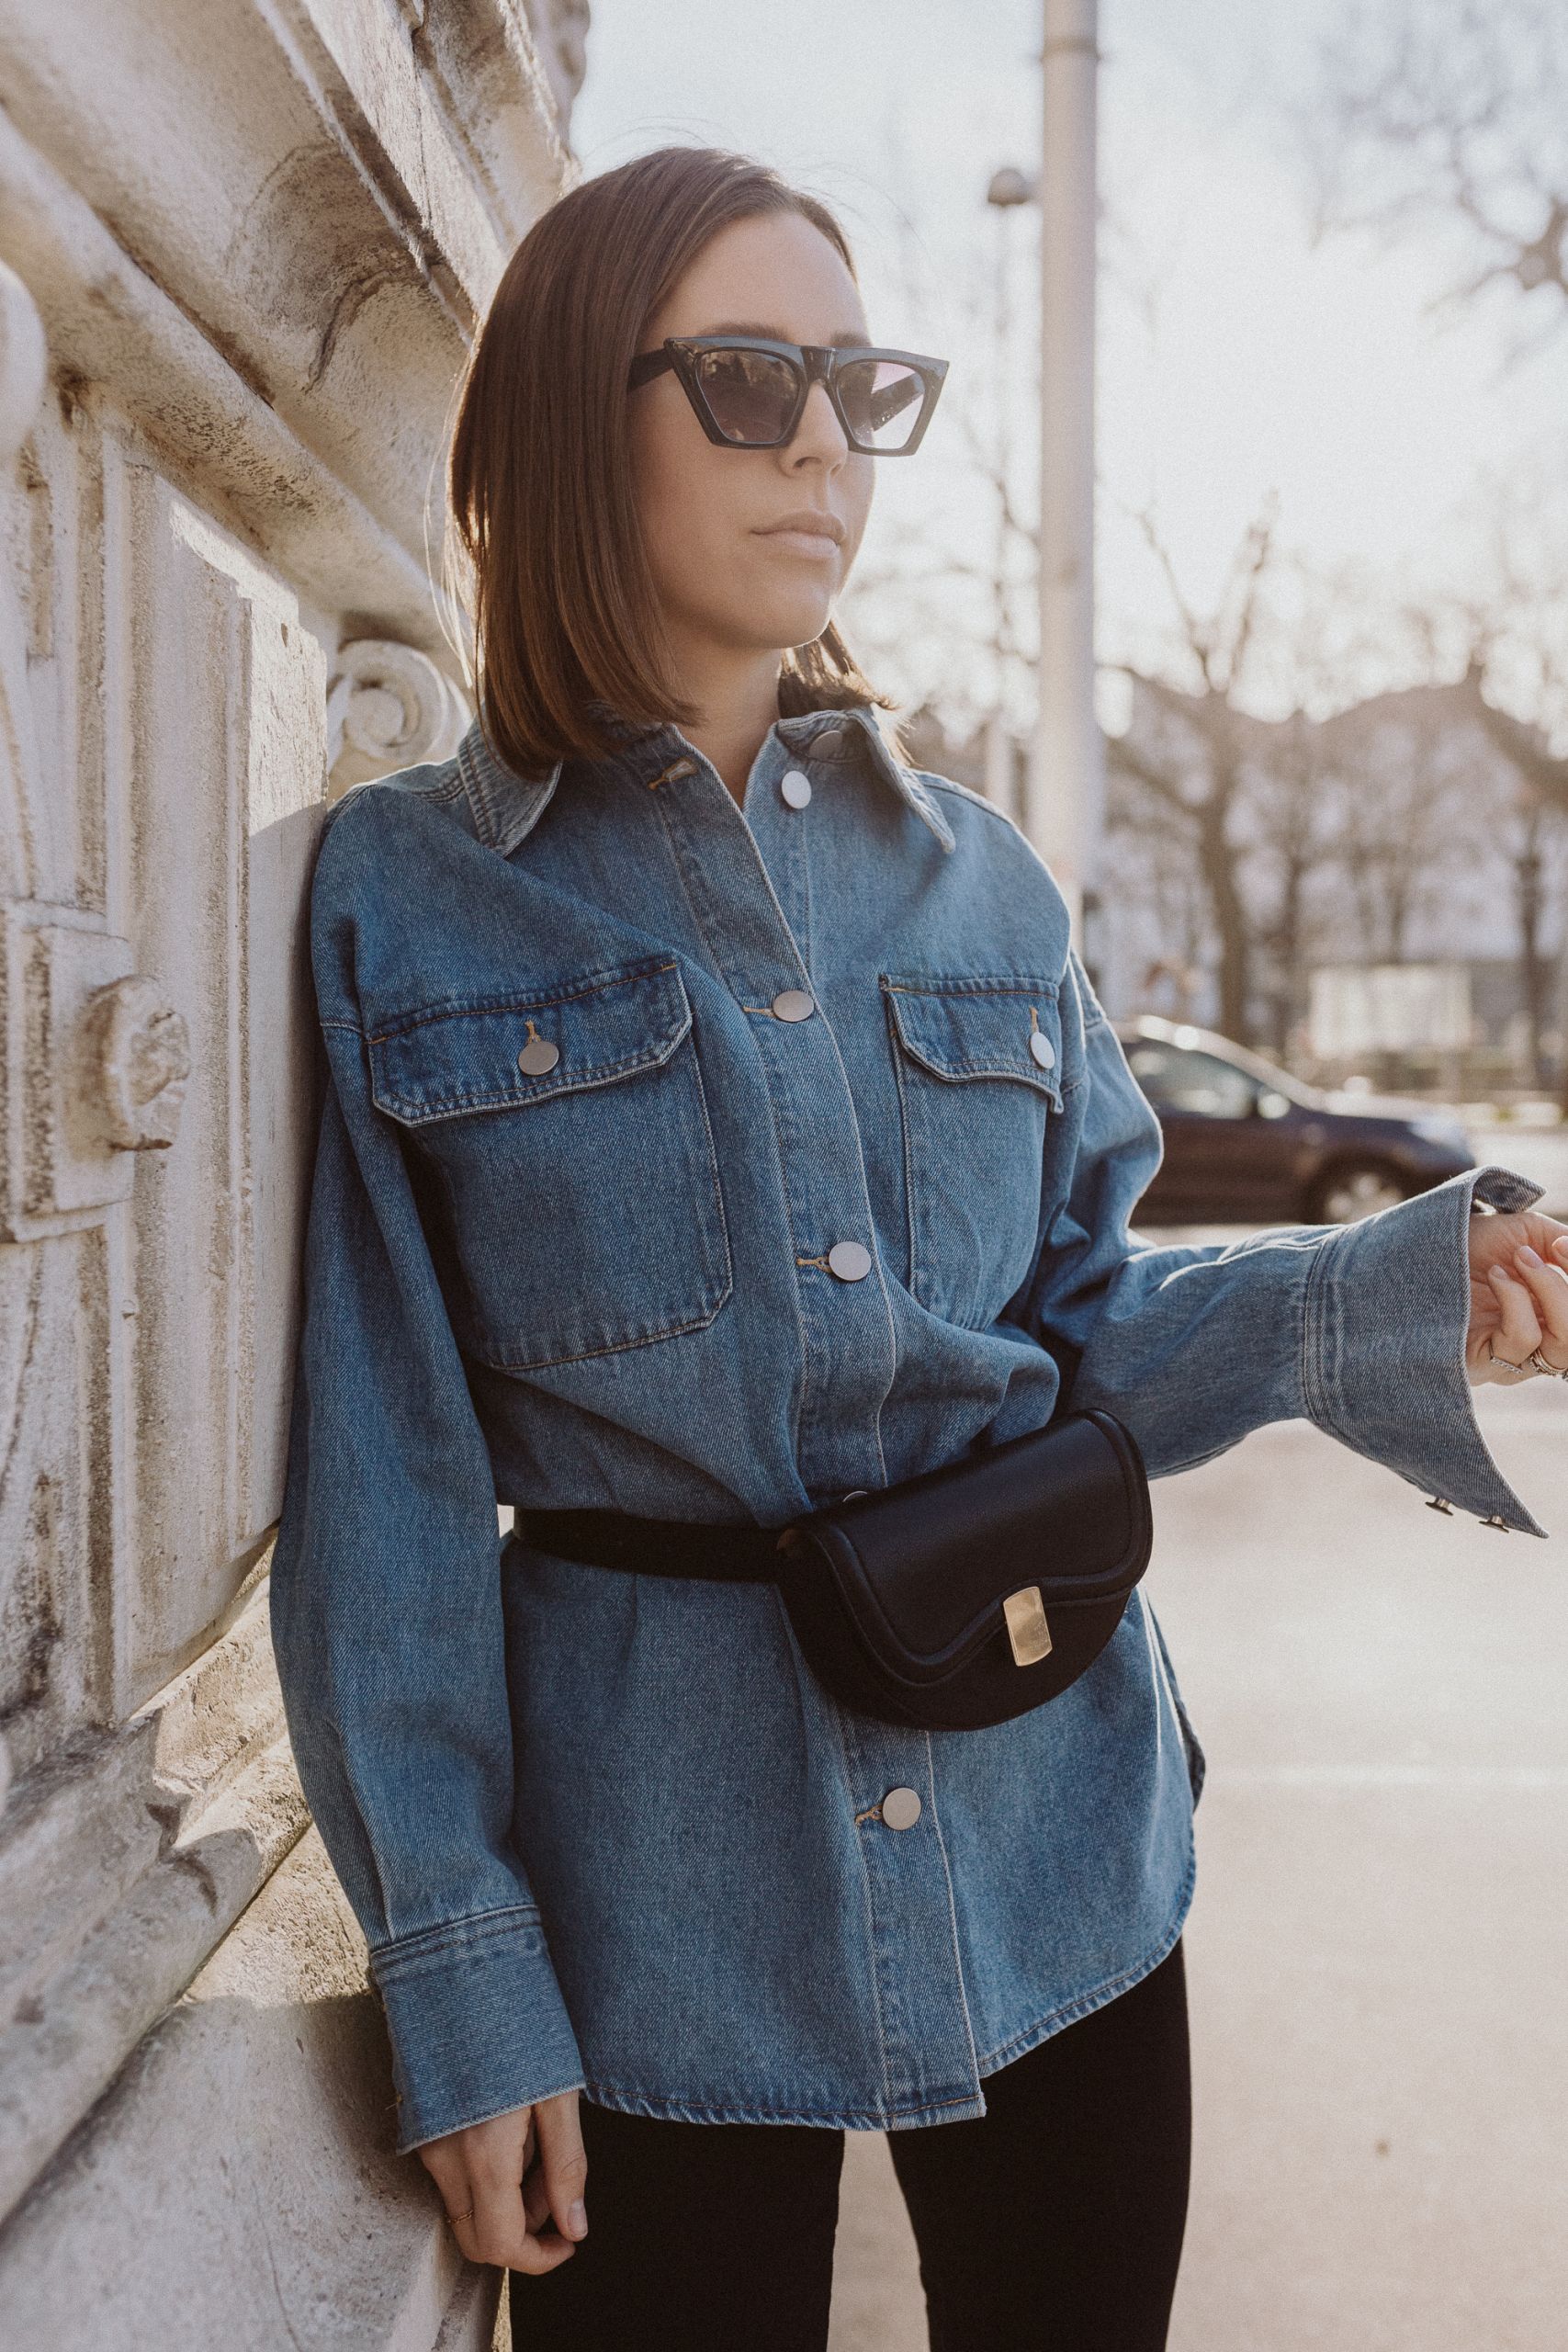 H&M x The Daily Dose Spring Looks: Denim Style - Love Daily Dose